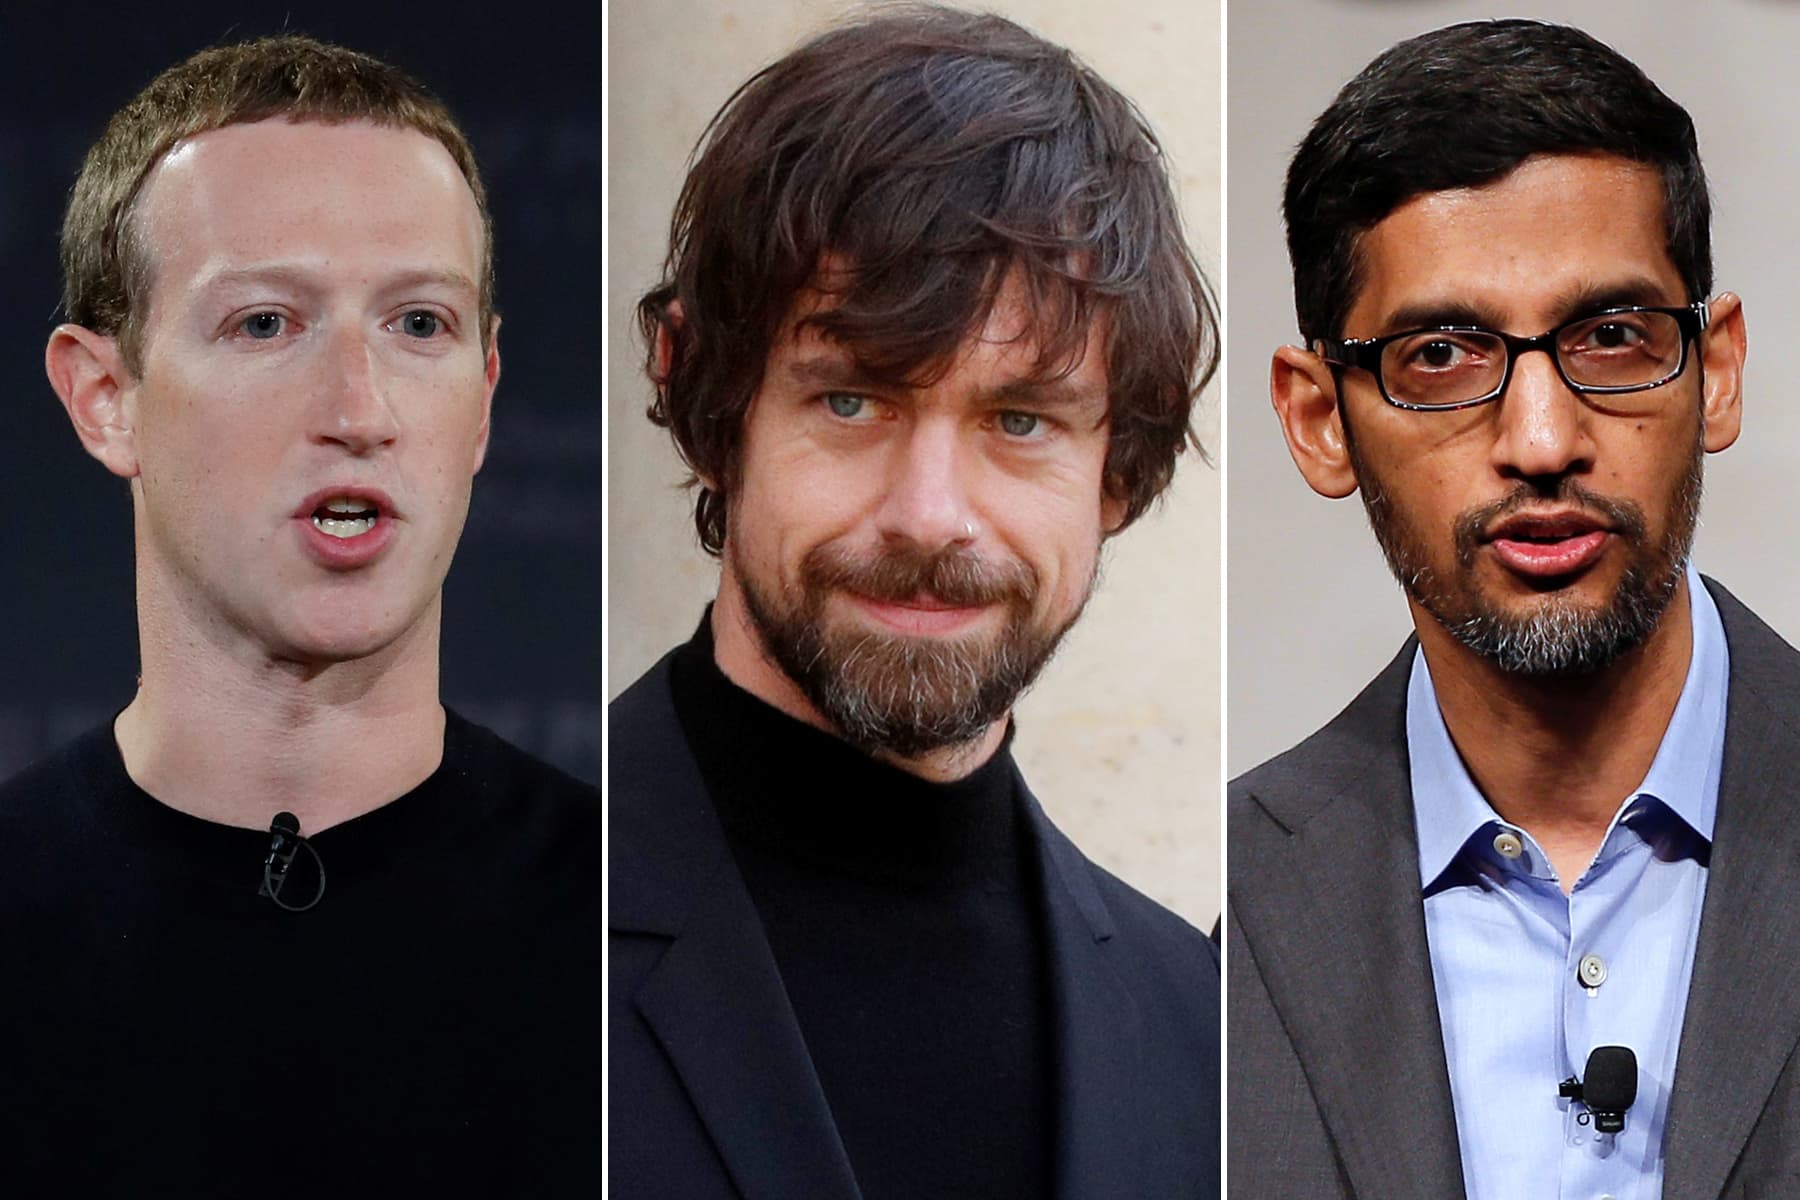 CEOs of Facebook, Google and Twitter will testify before Congress in March